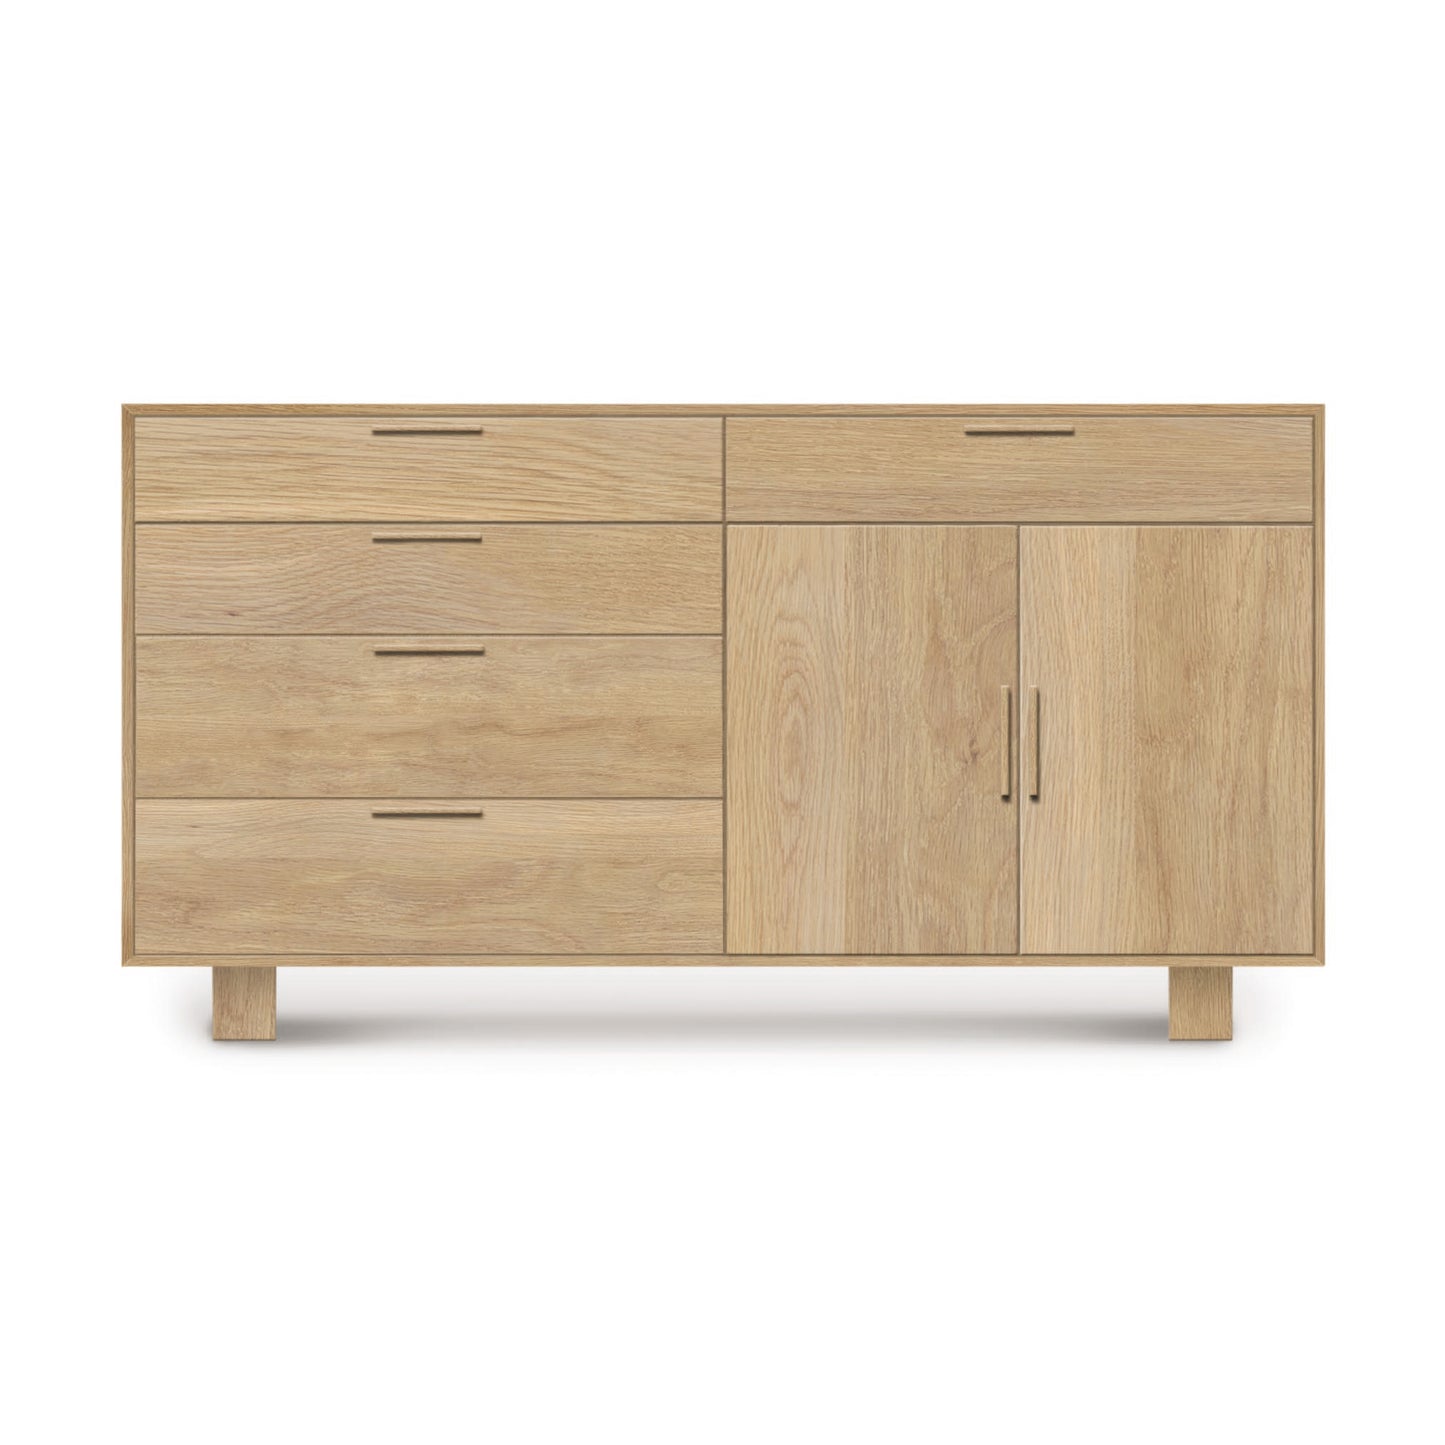 Copeland Furniture Iso Oak 2 Door, 5 Drawer Buffet sideboard with three drawers on the left and two doors on the right, isolated on a white background, crafted from solid hardwood oak.